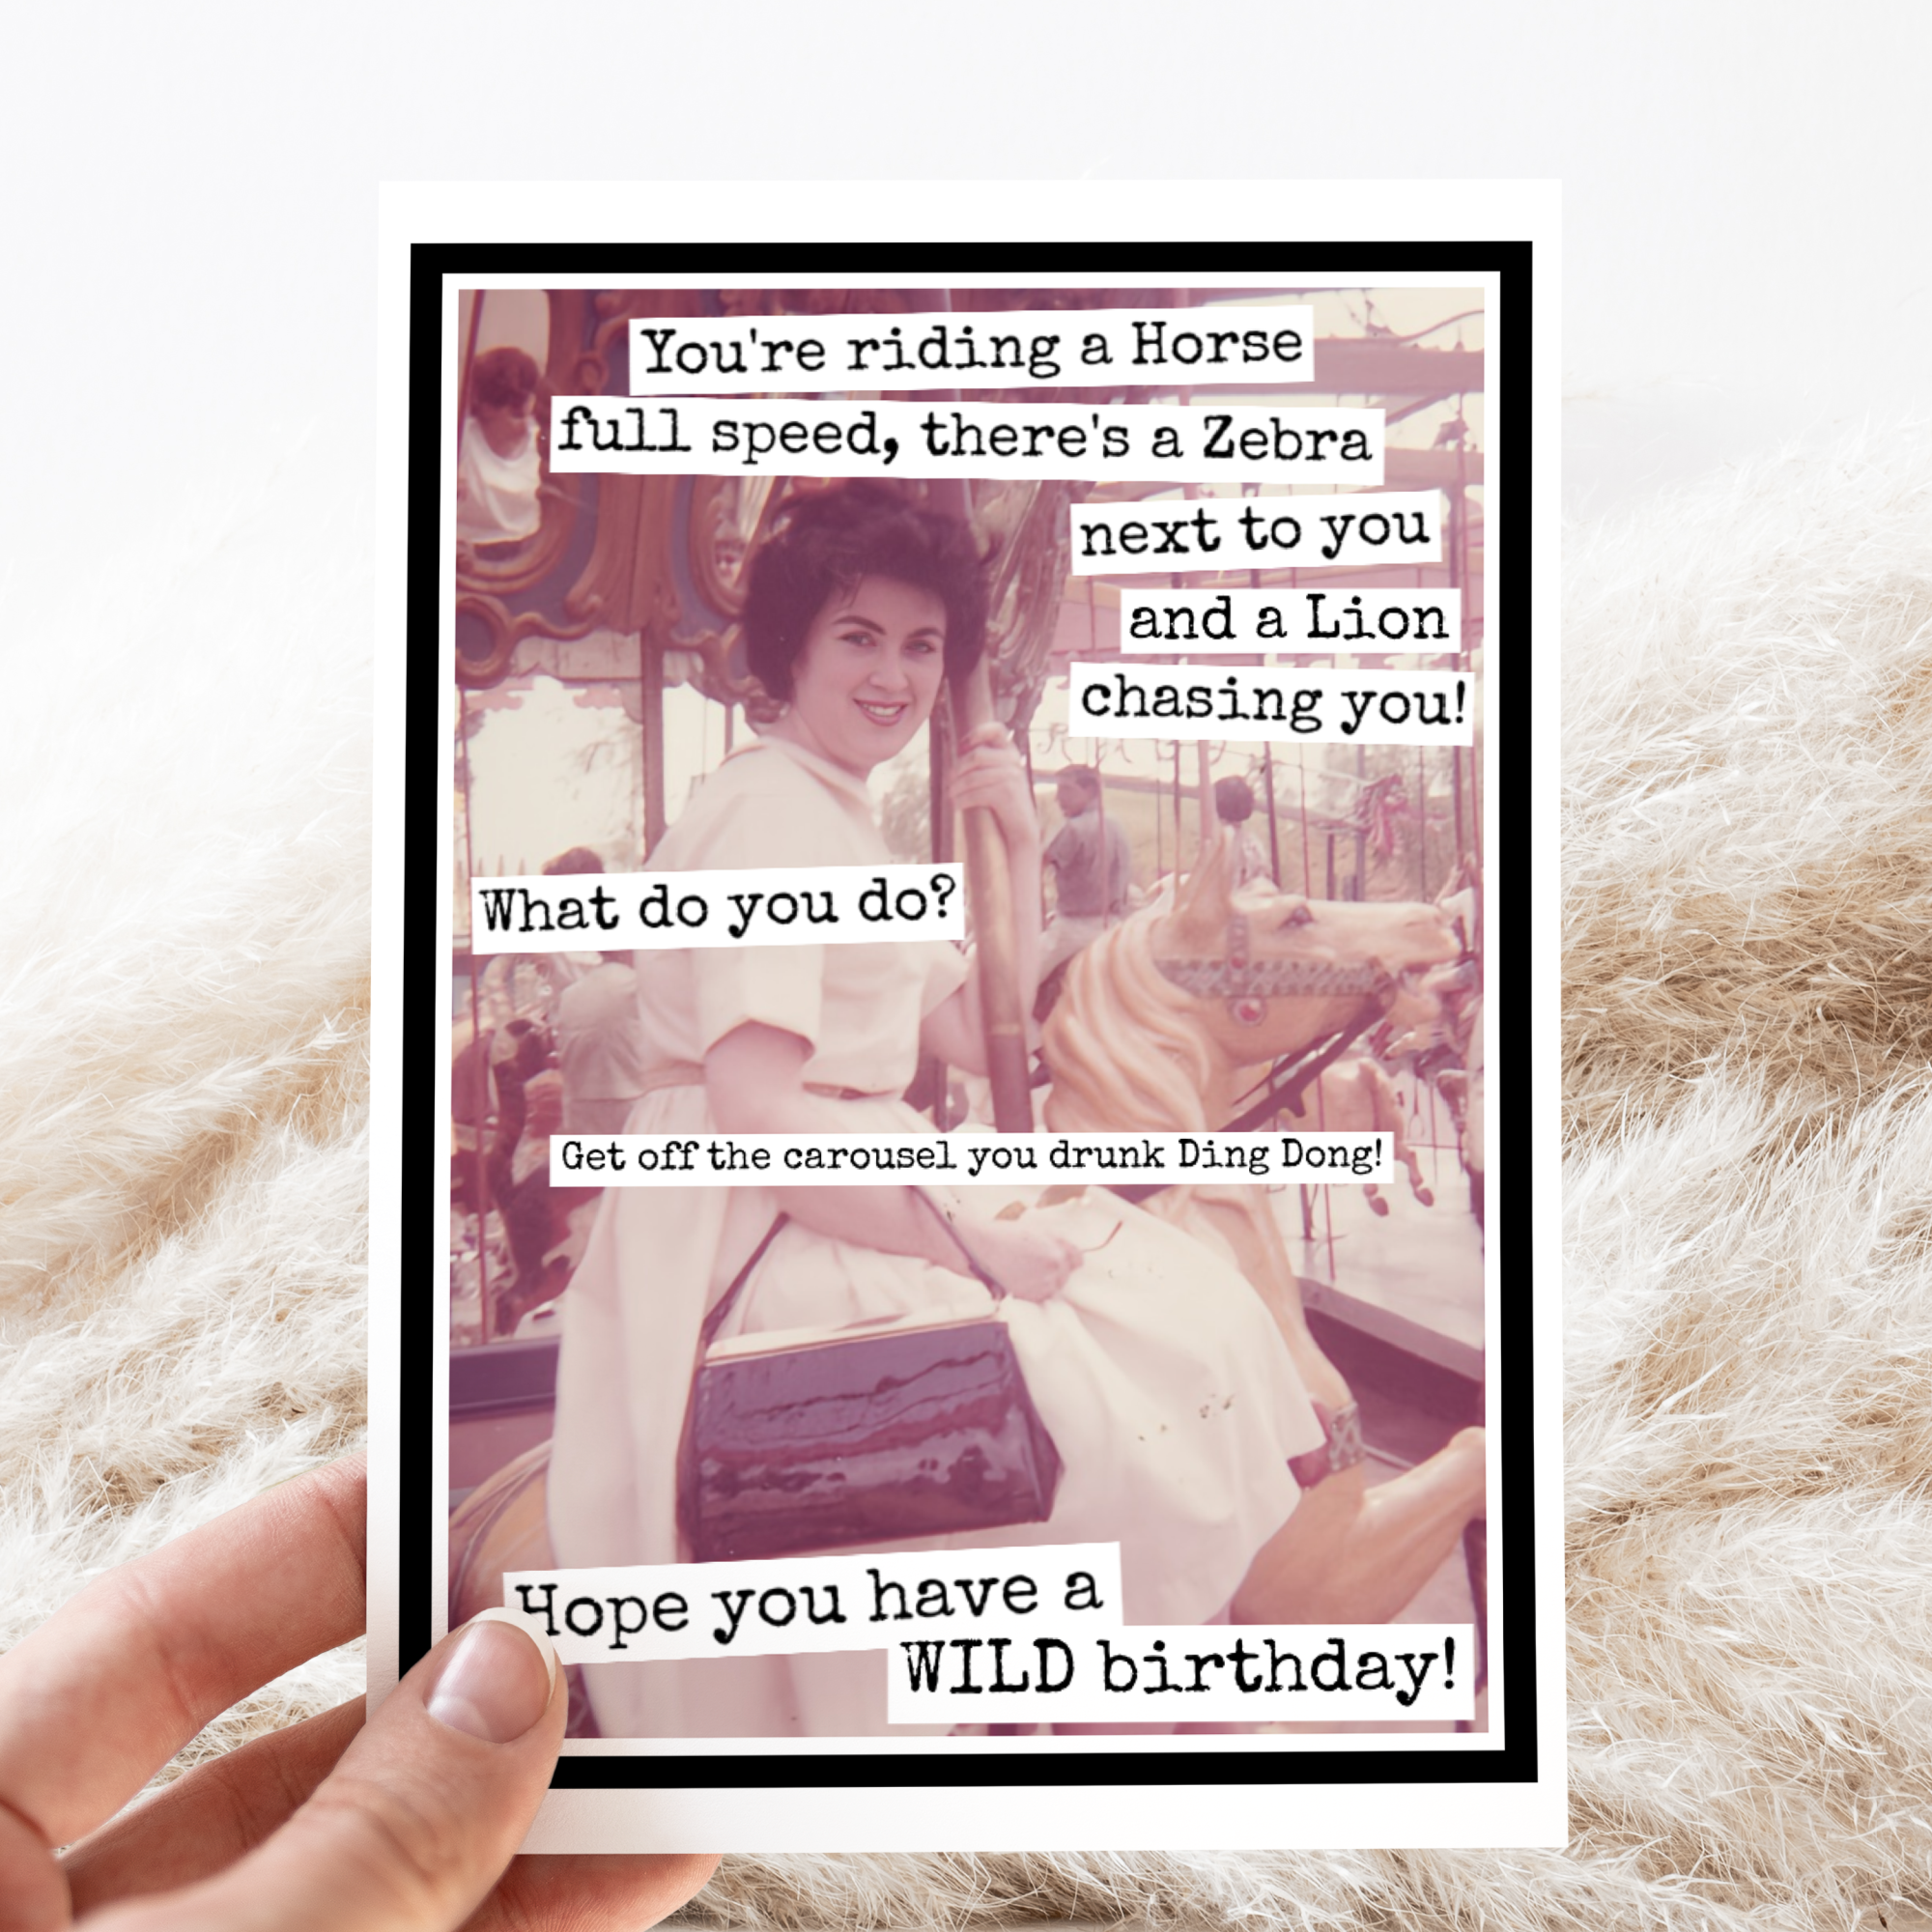 Funny Birthday Card. You're Riding A Horse Full Speed...